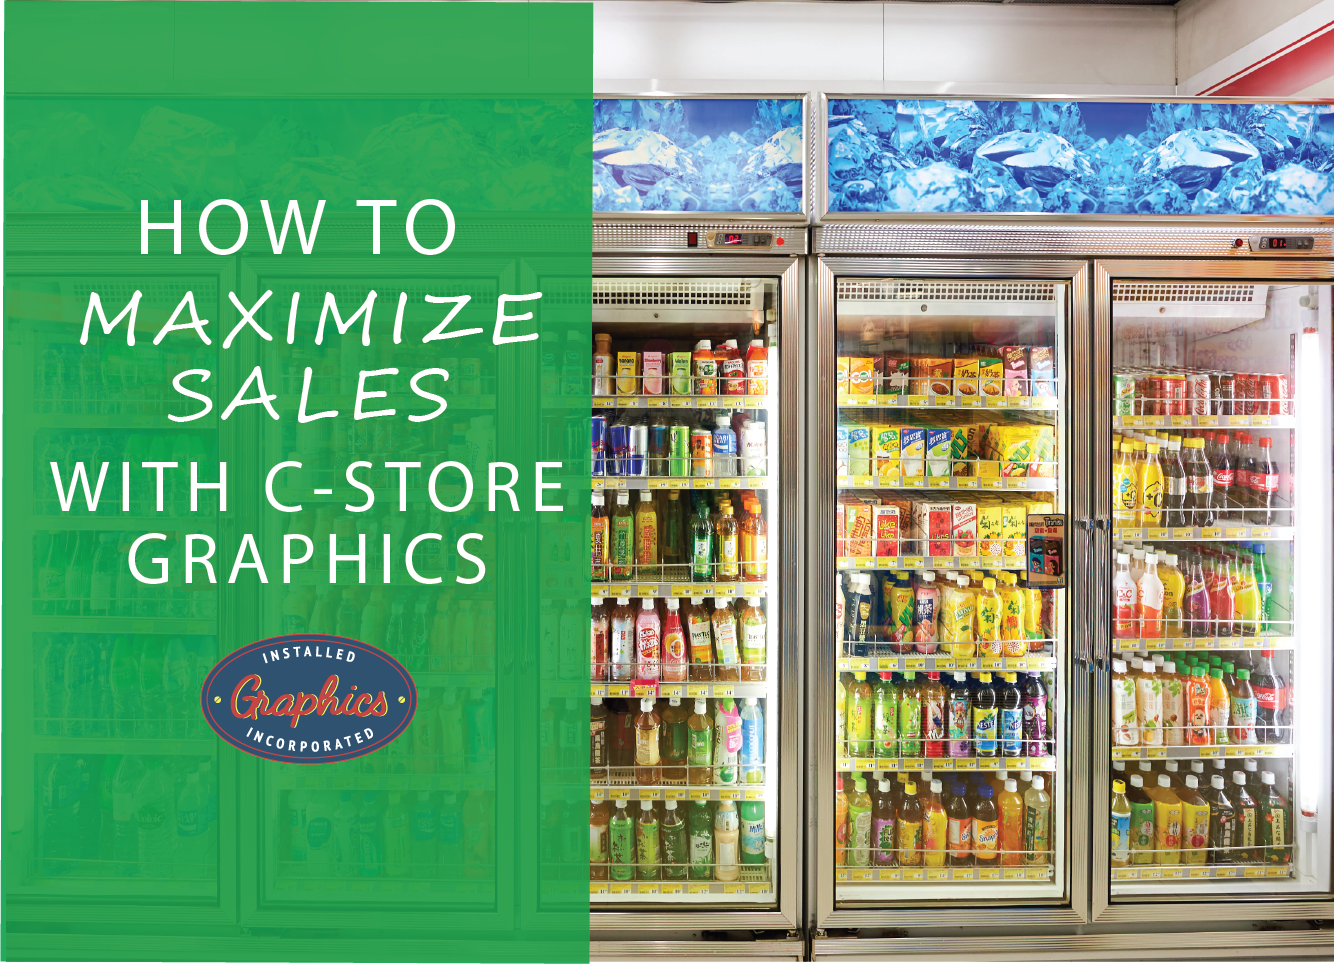 How to Maximize Sales with C-Store Graphics